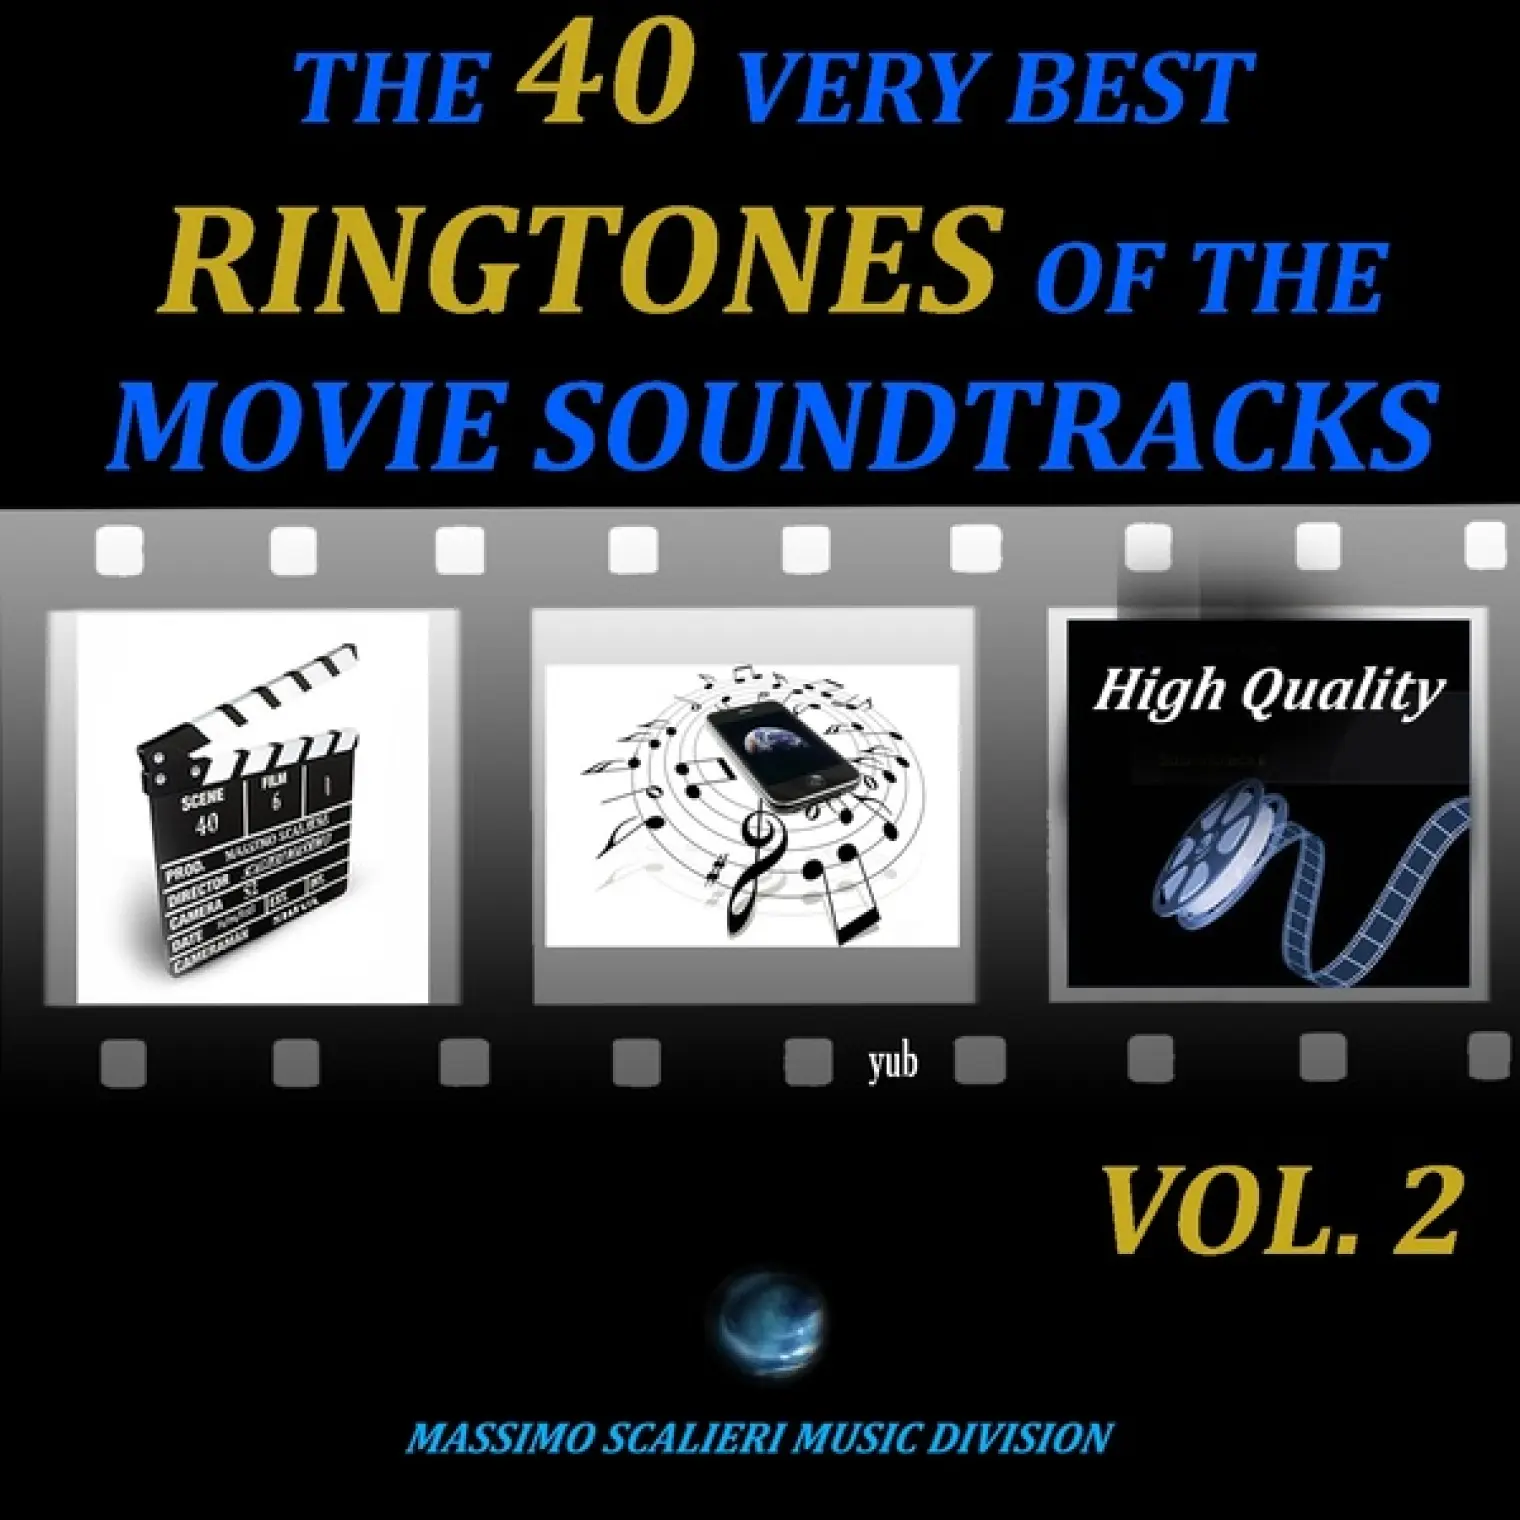 The 40 Very Best Ringtones of the Movie Soundtracks, Vol. 2 (High Quality) -  The Phone 